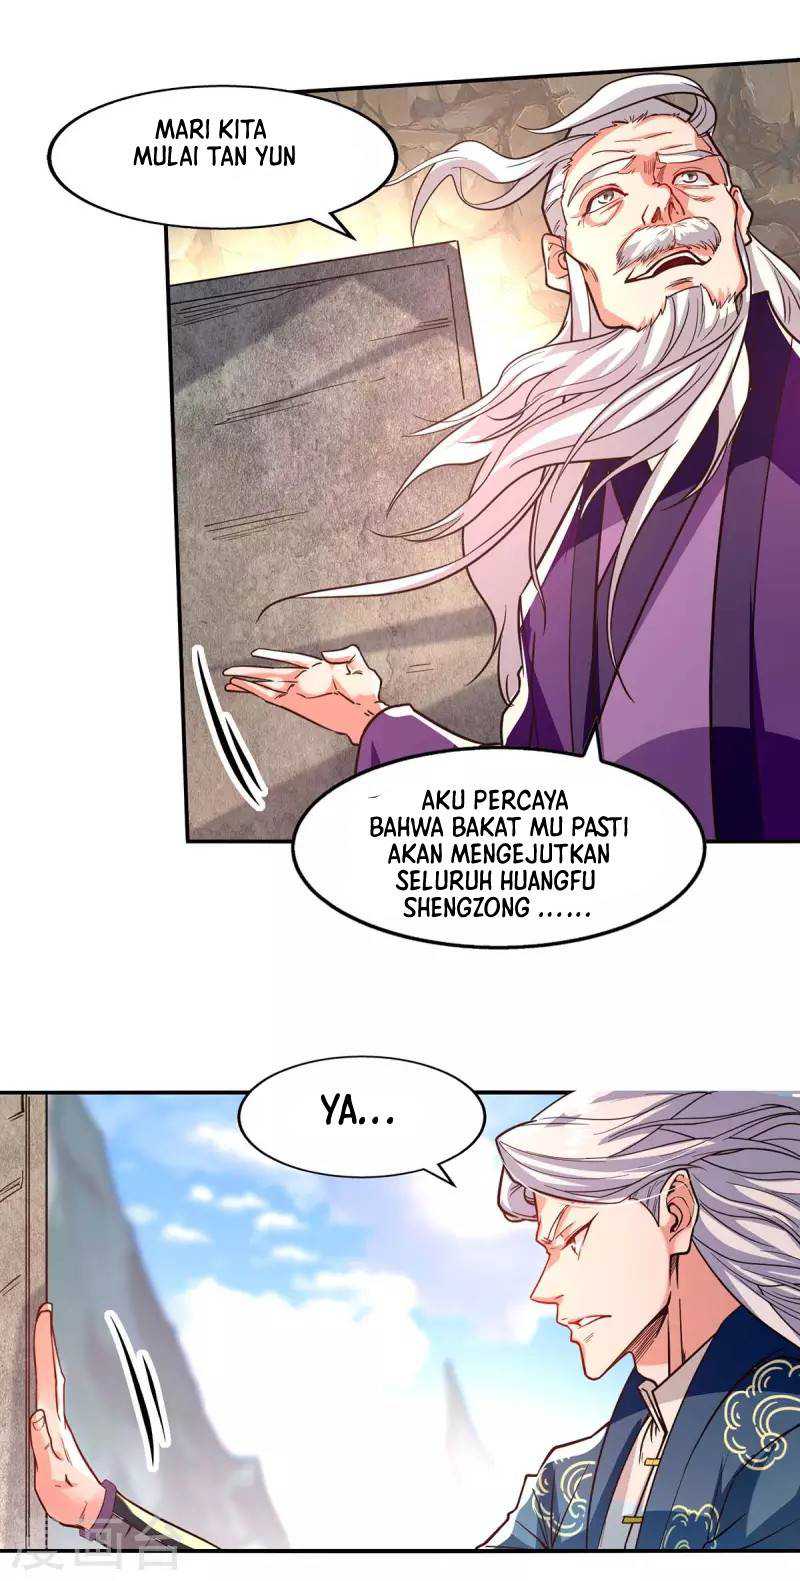 Against The Heaven Supreme (Heaven Guards) Chapter 90 - 157